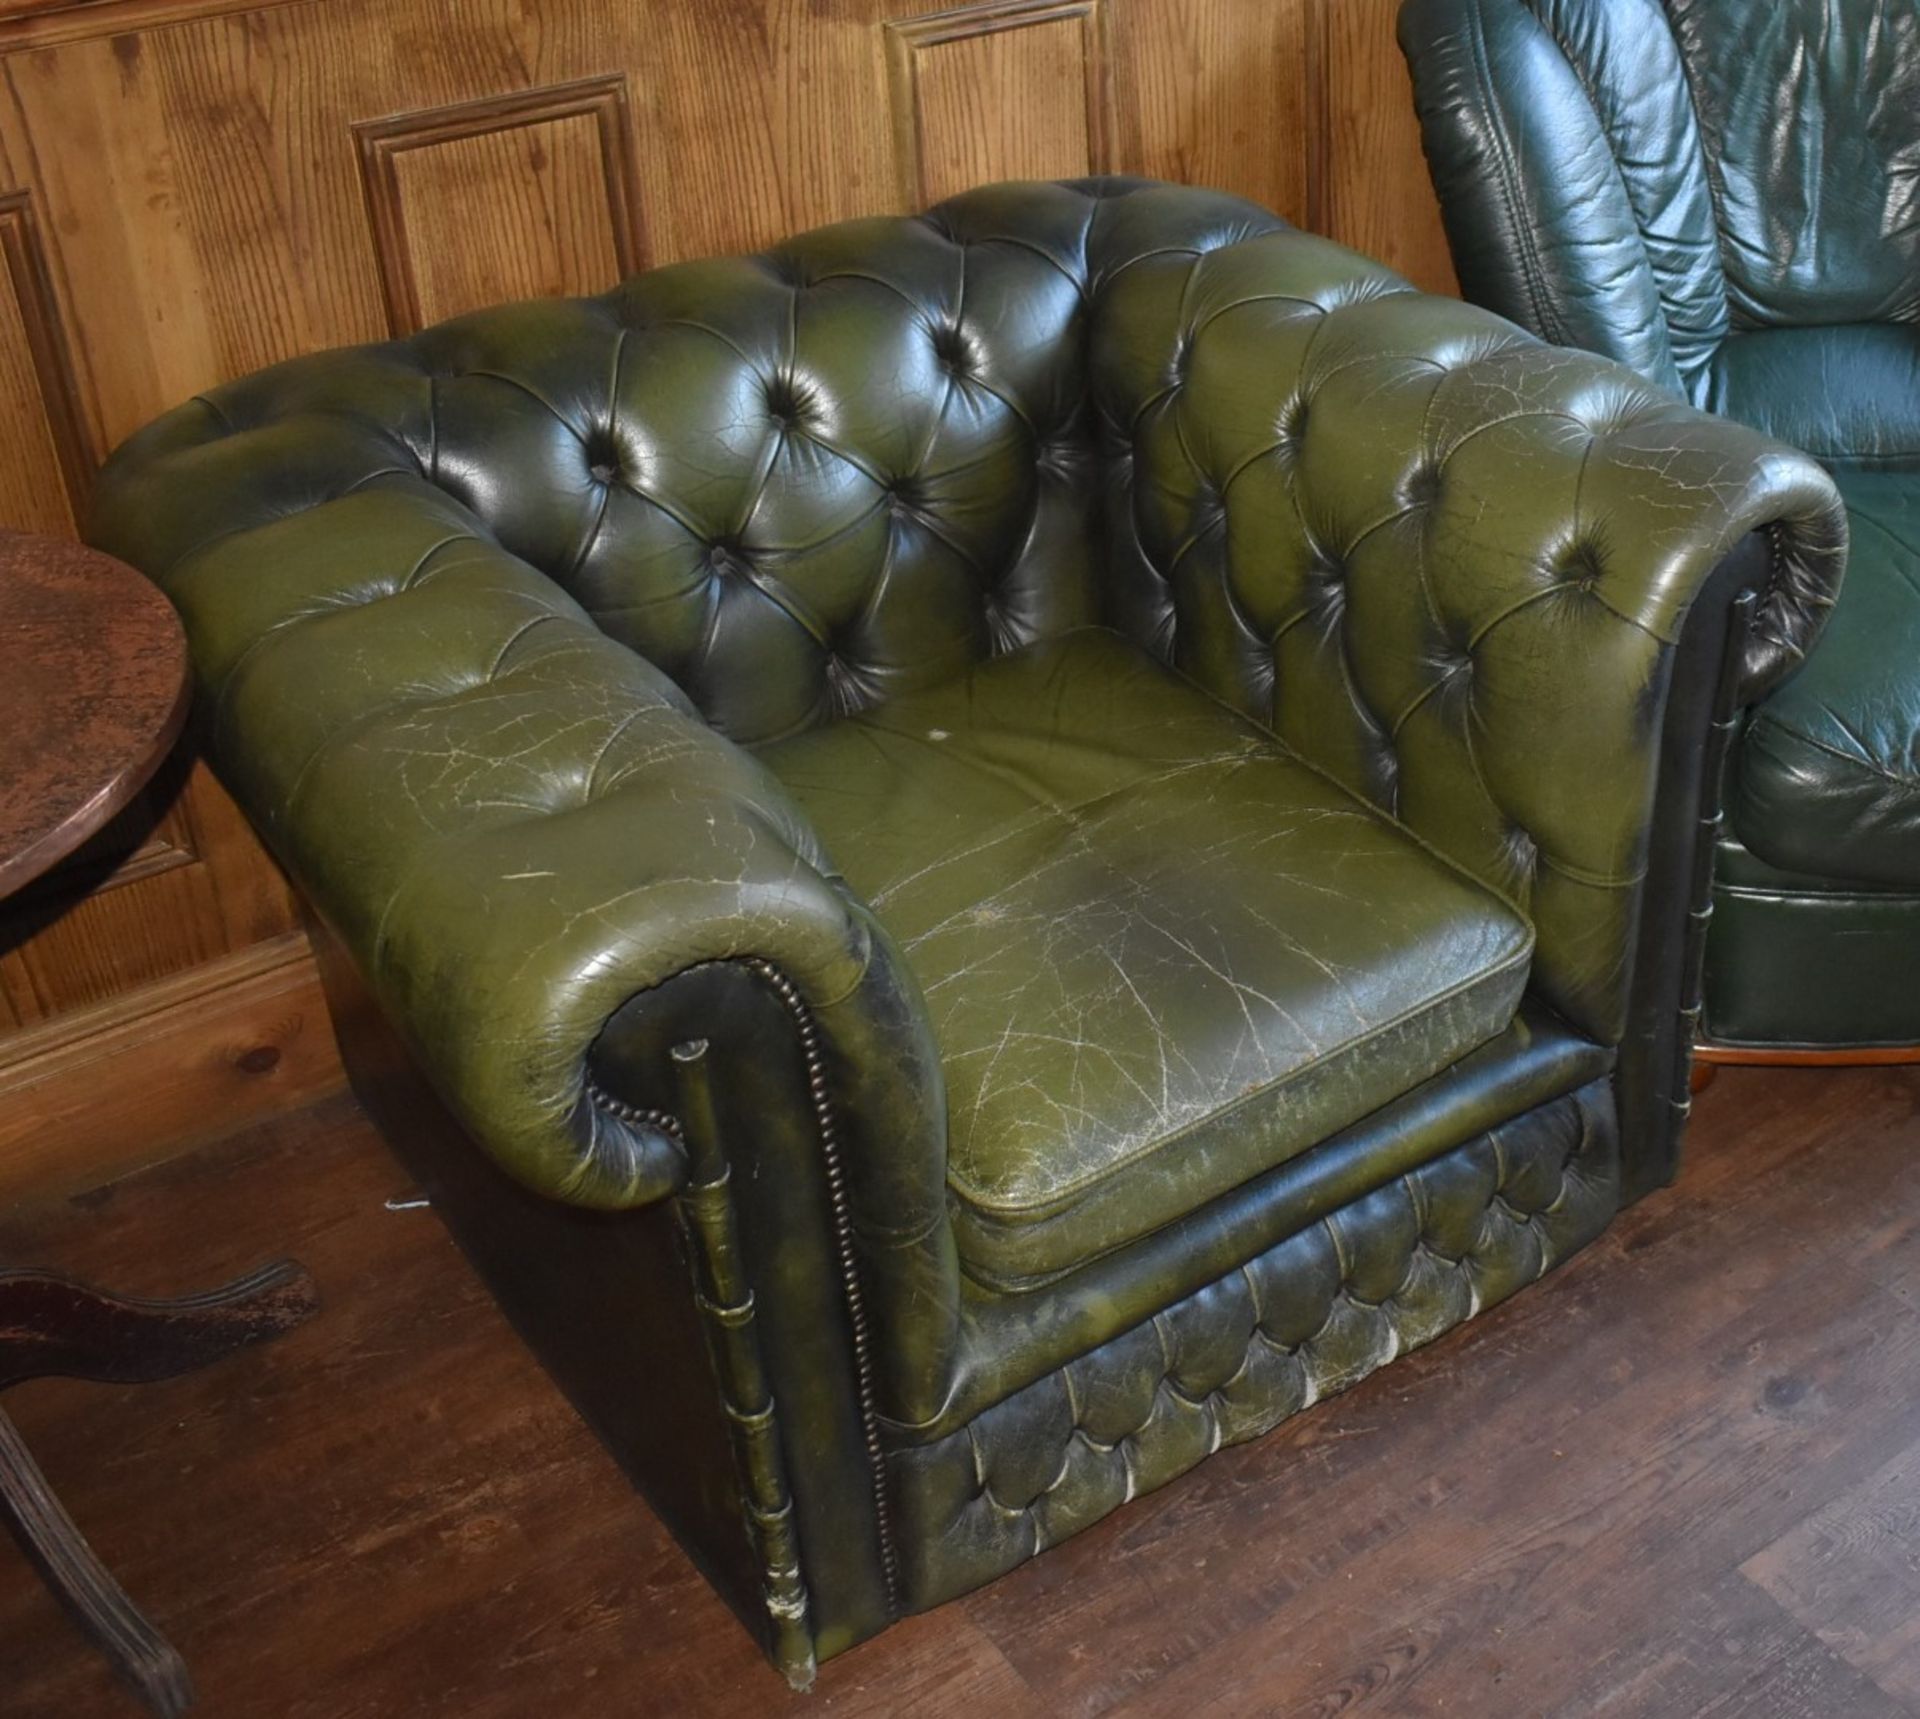 1 x Chesterfield Style Antique Green Leather Sofa With Matching Armchair - CL586 - Location: - Image 2 of 3